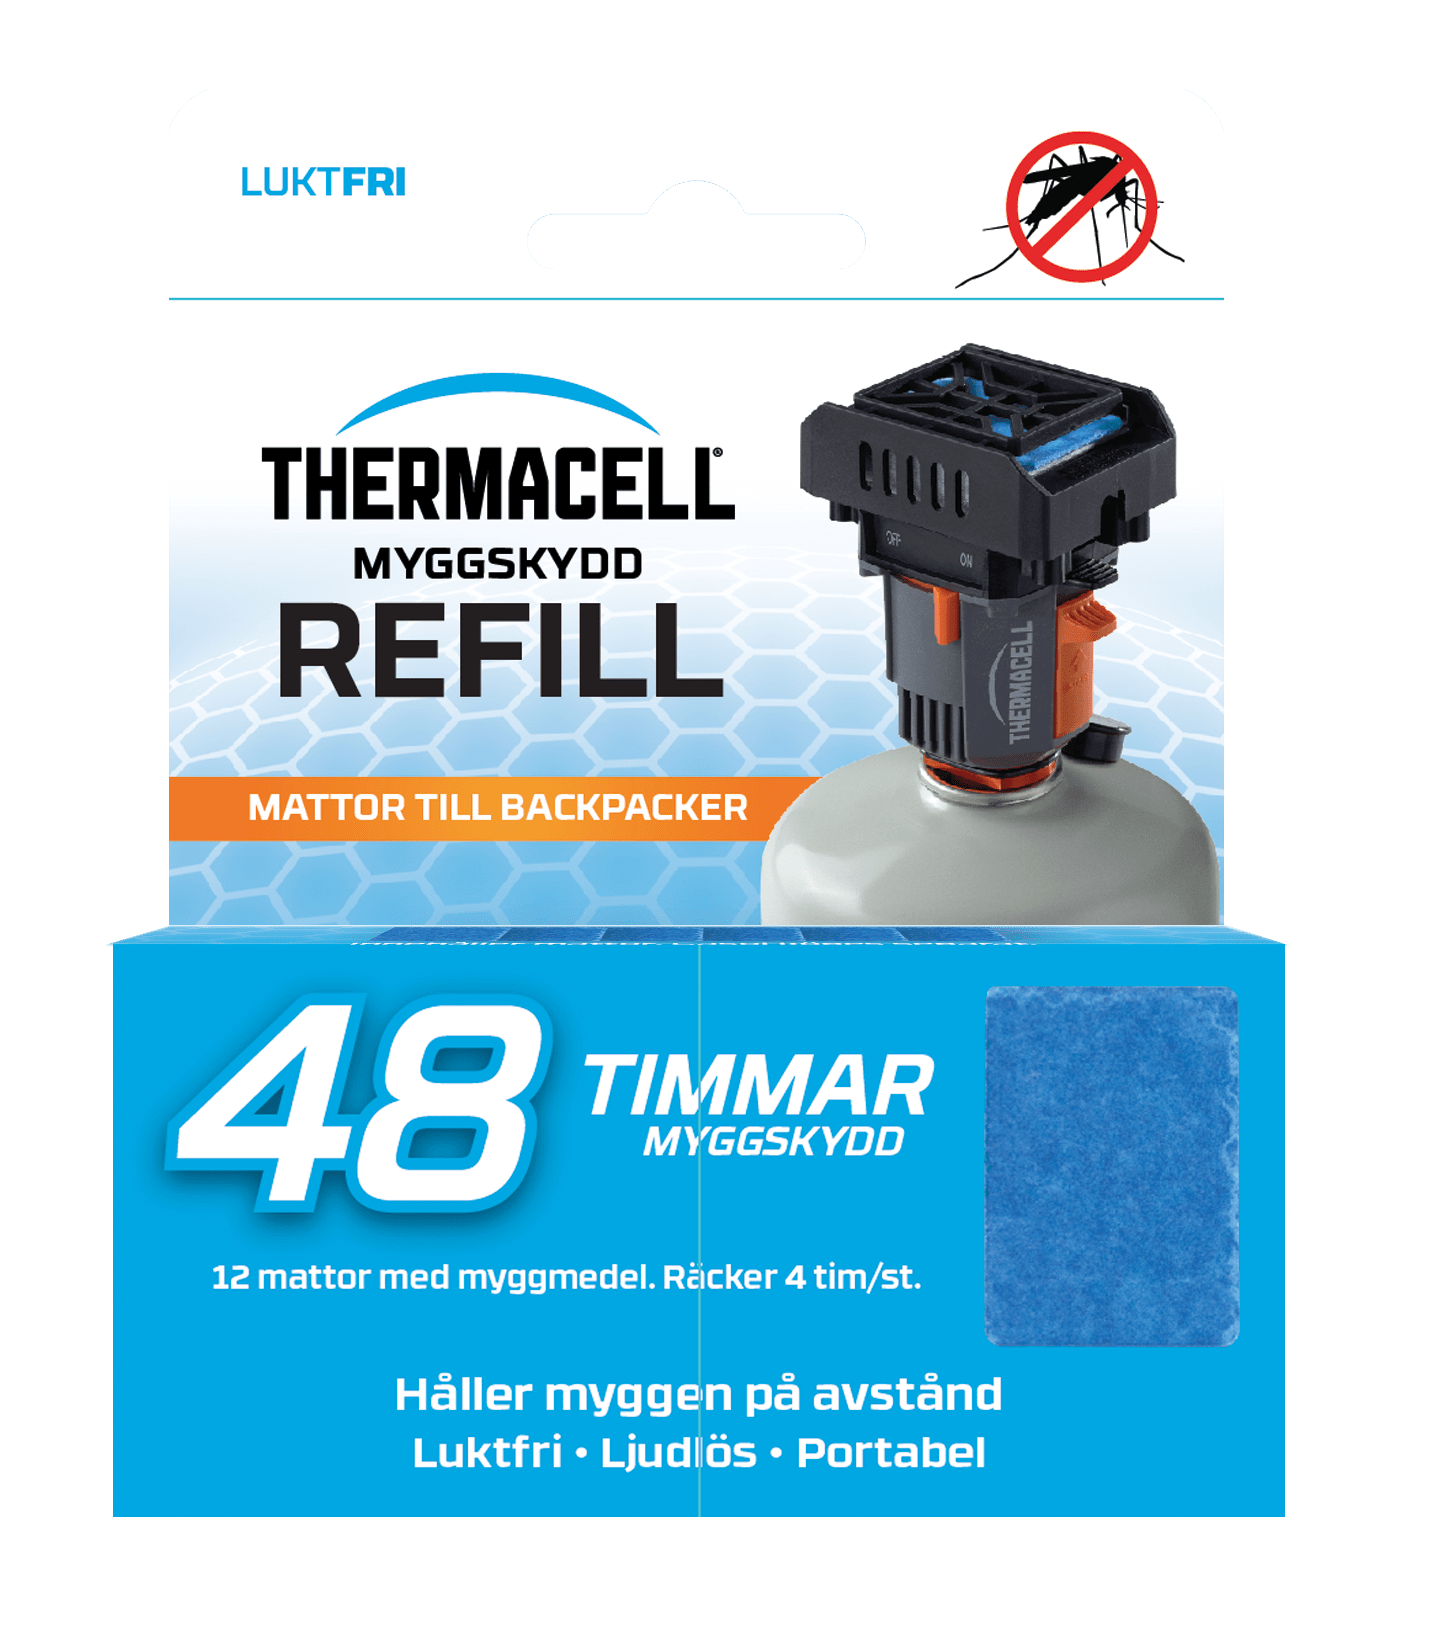 Thermacell Refill till Backpacker 48h